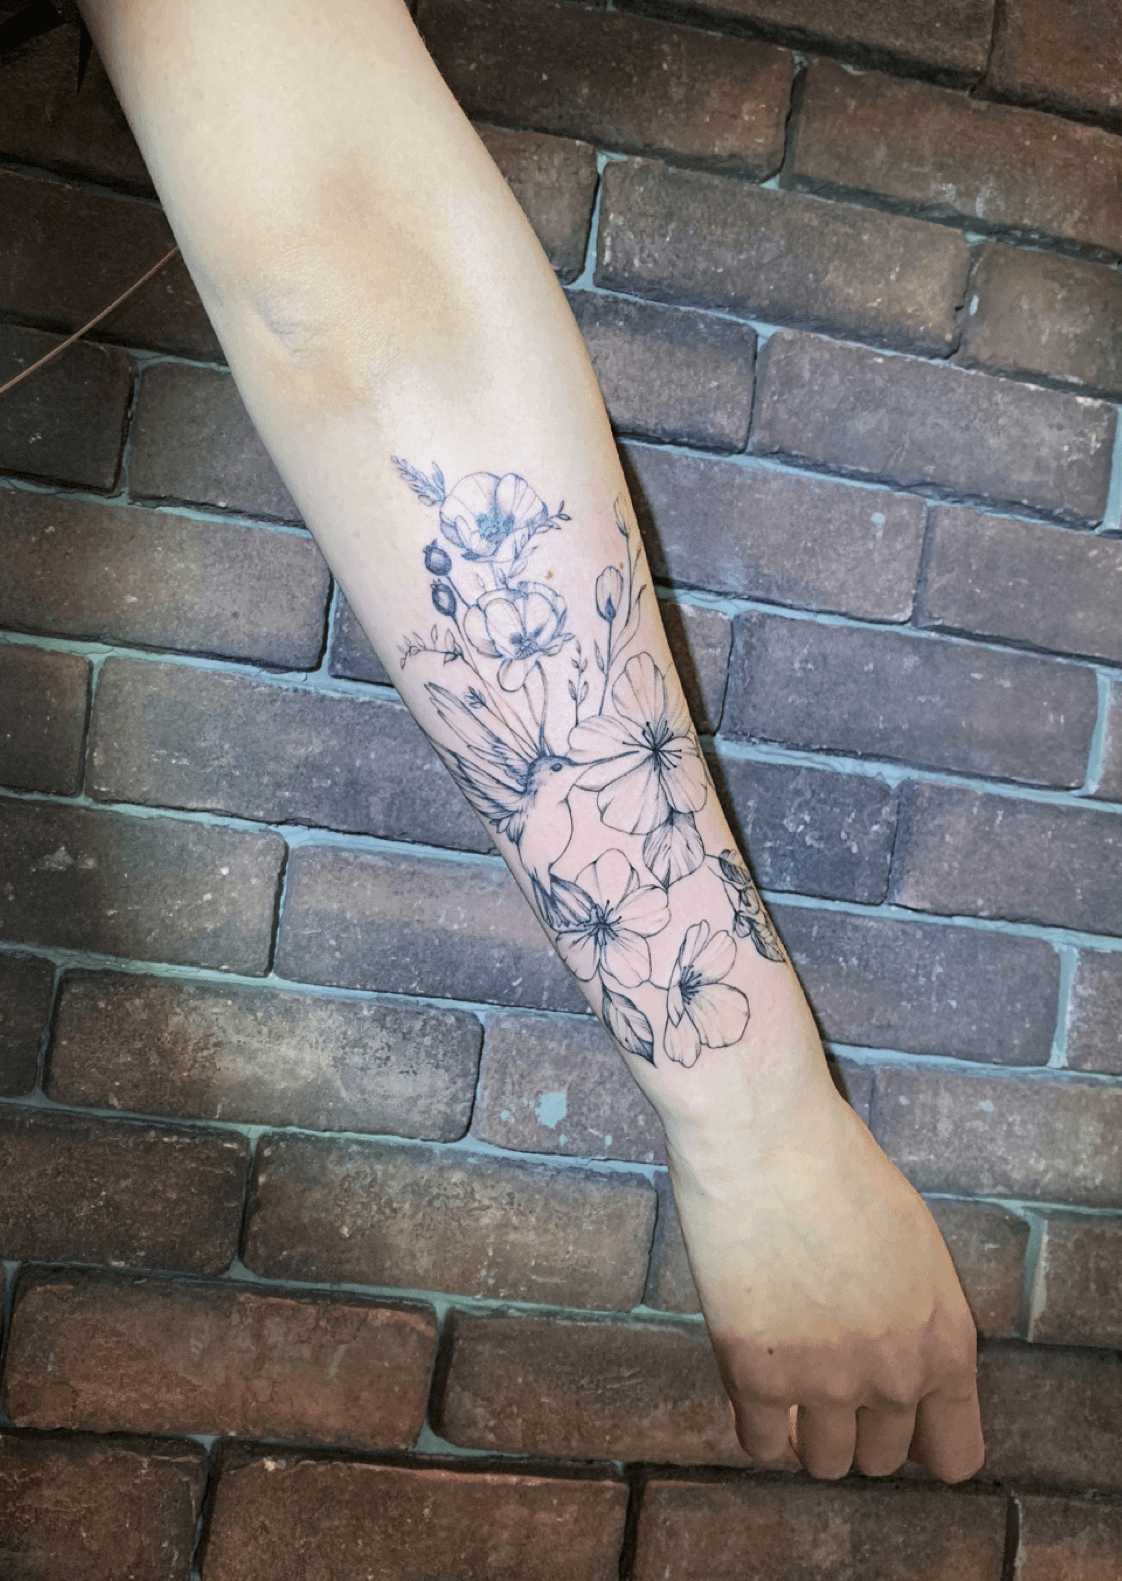 Rickies Tattoo Fine Line Tattoos In Pastel Colours In Singapore   GirlStyle Singapore